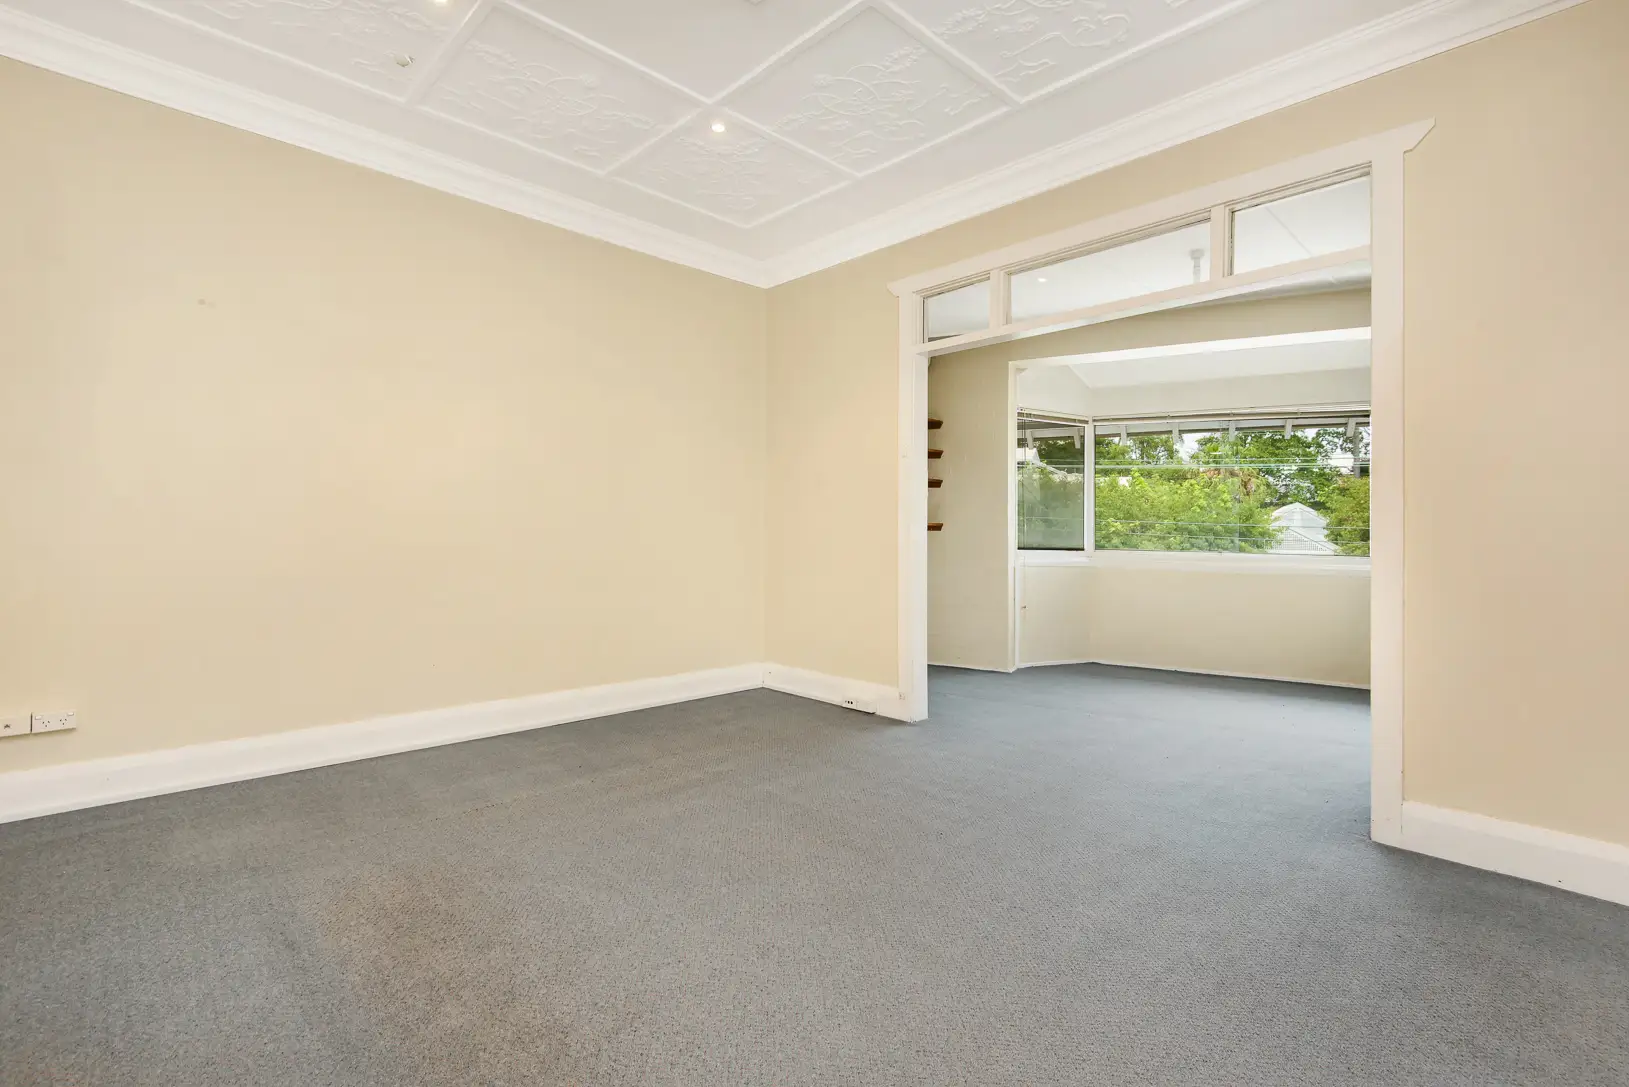 41 Hill Street, Roseville Sold by Shead Property - image 1